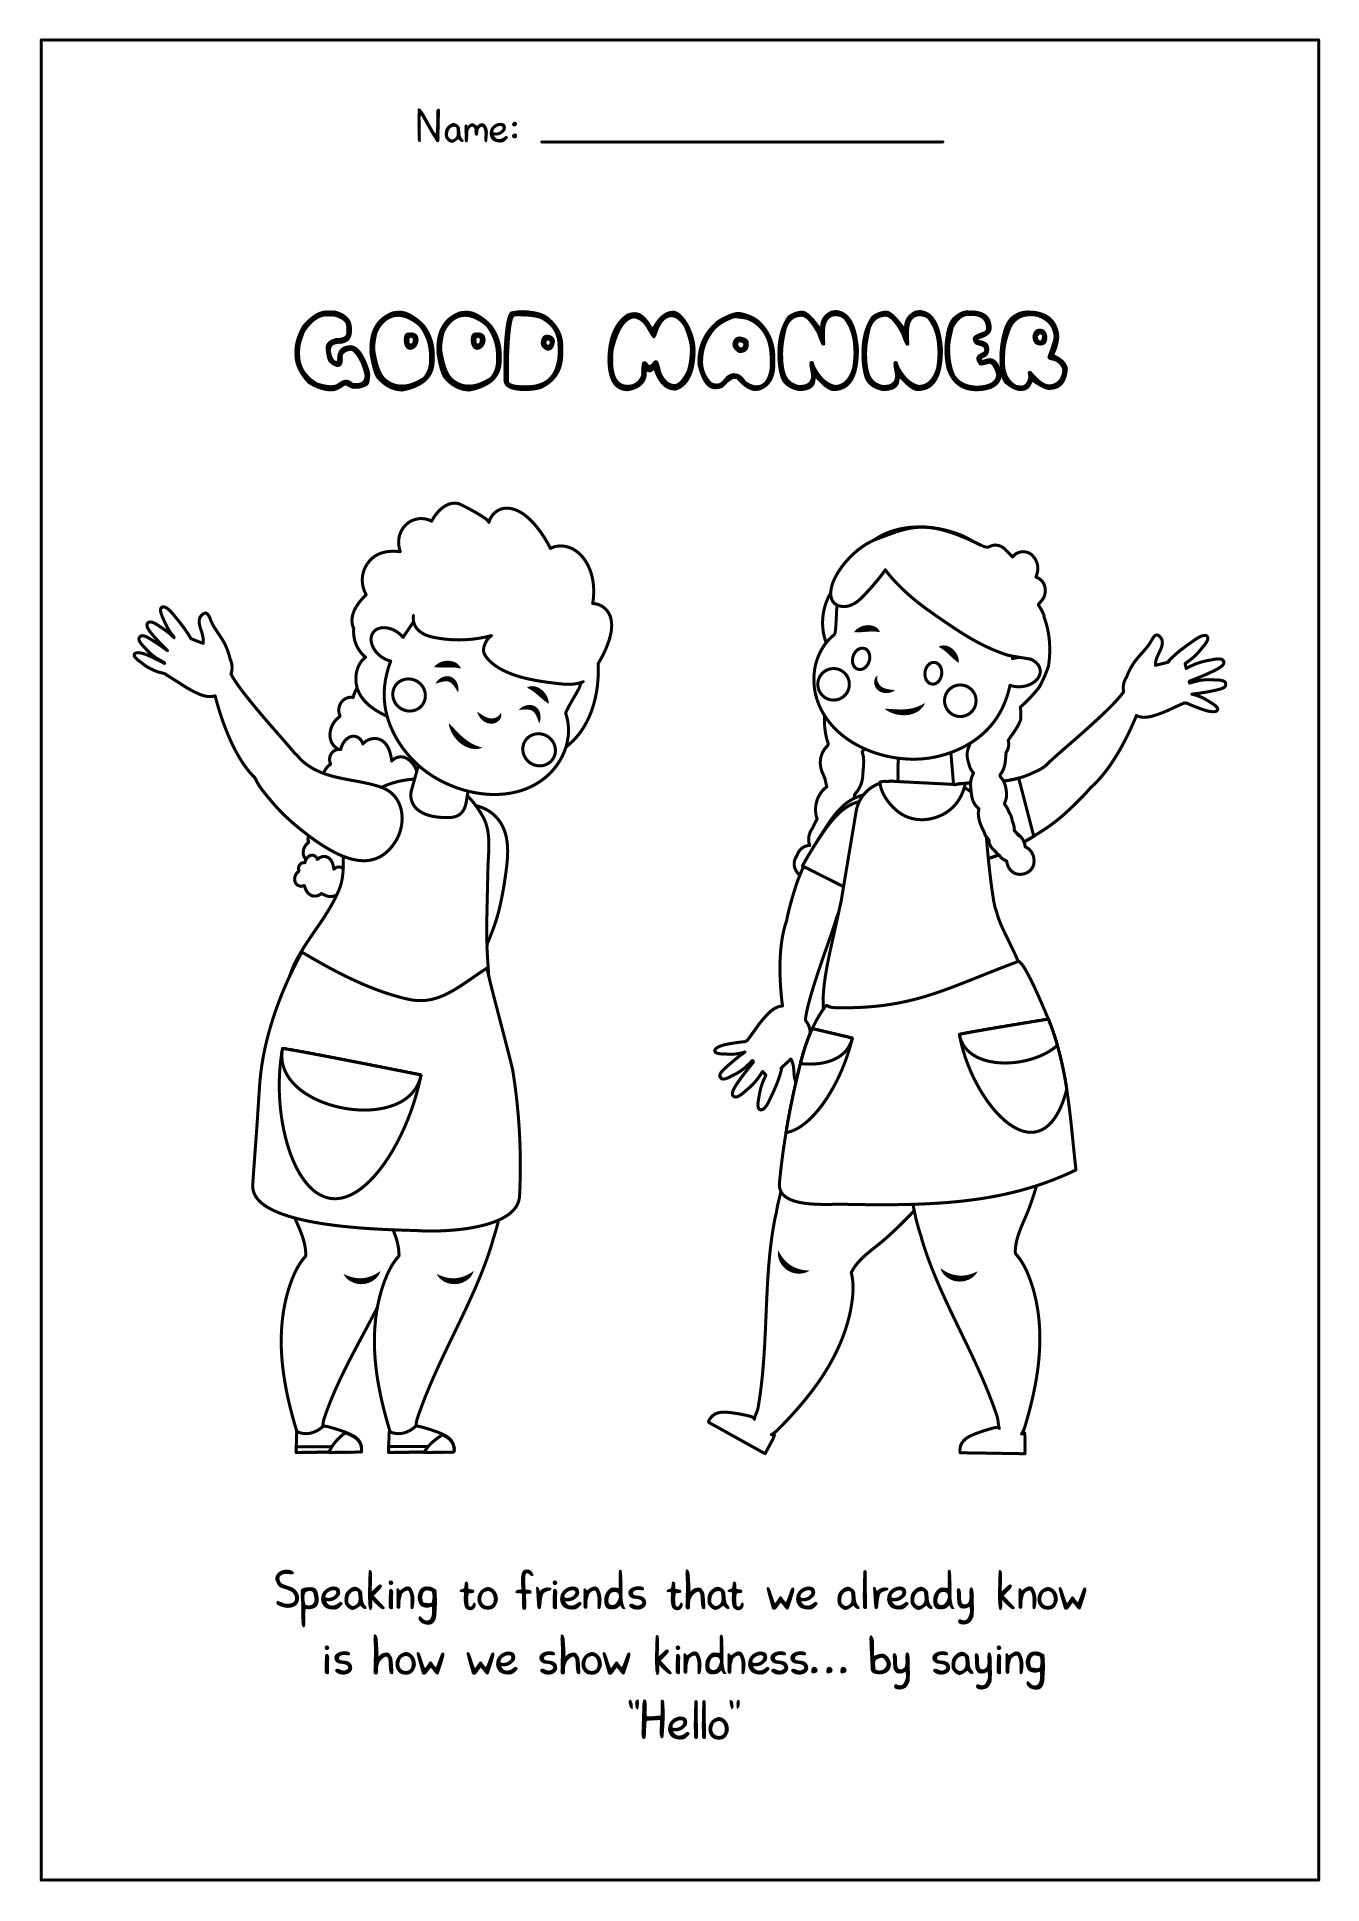 manners coloring pages preschool - photo #15